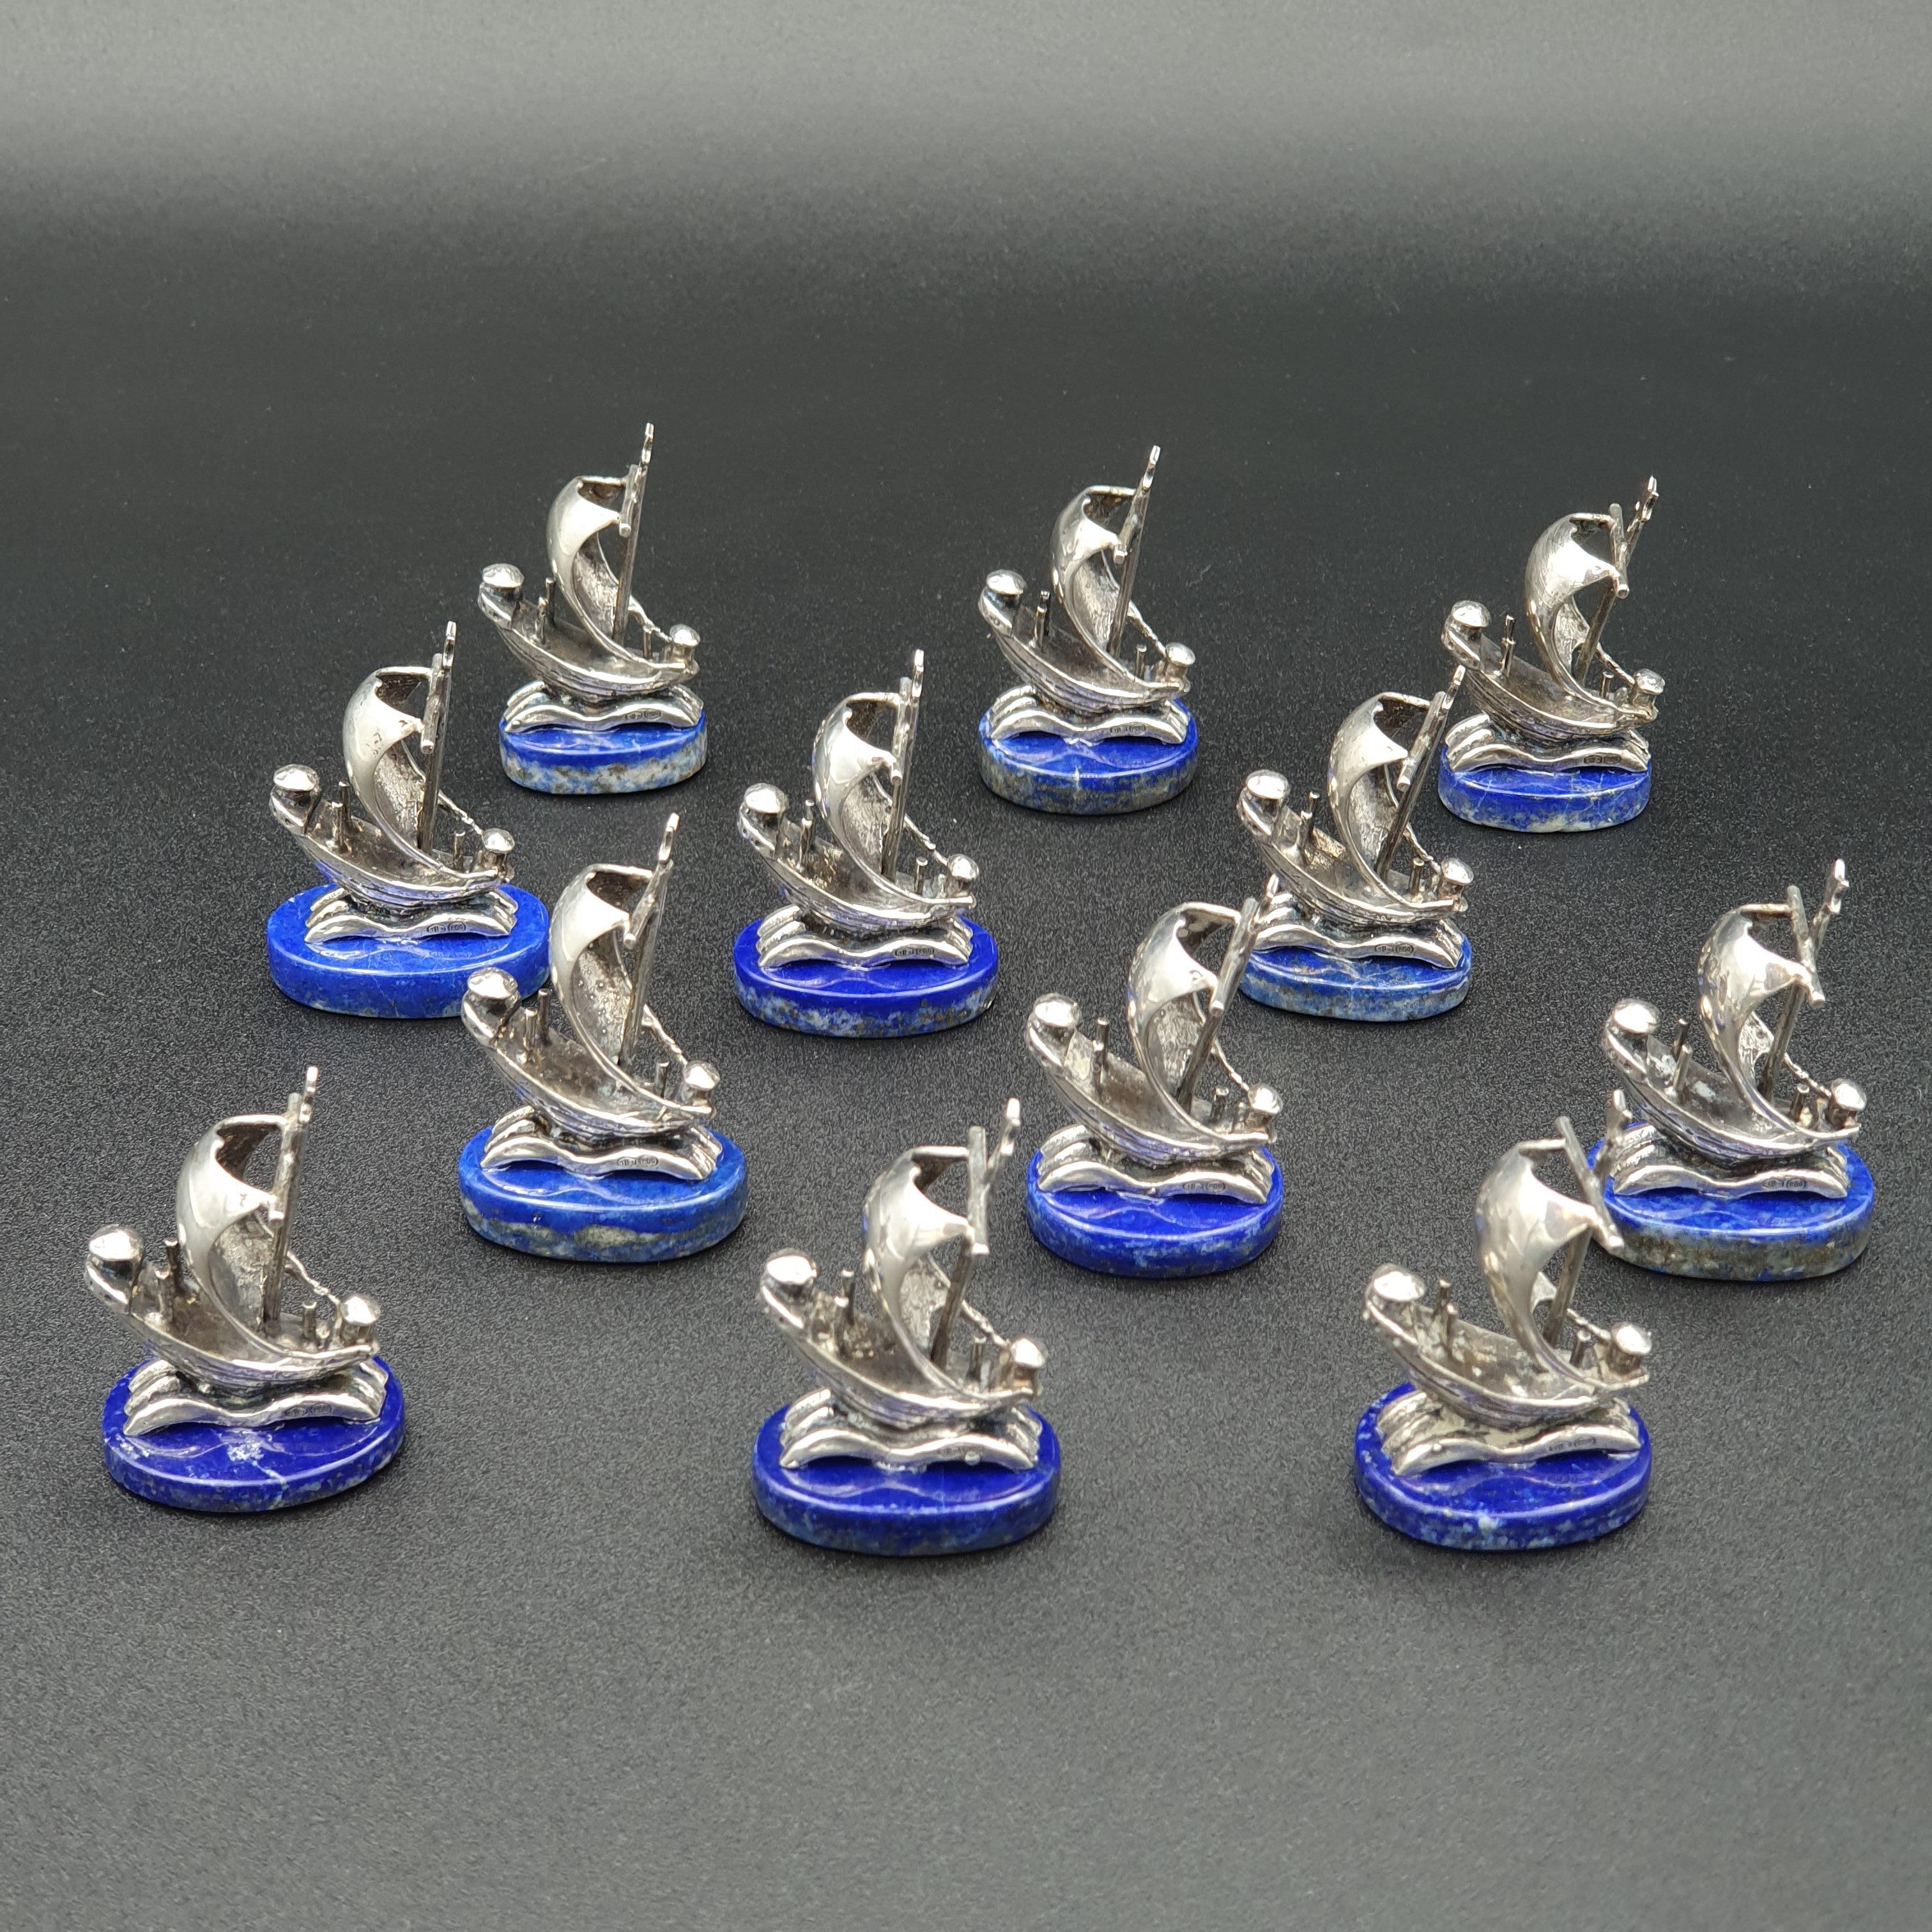 12 place cards holders in solid silver, in the shape of a sailing boat 

The base in lapis lazuli 

Silver hallmark 800 

Measures: Height: 4.3 cm 
Length: 3 cm

Good condition.